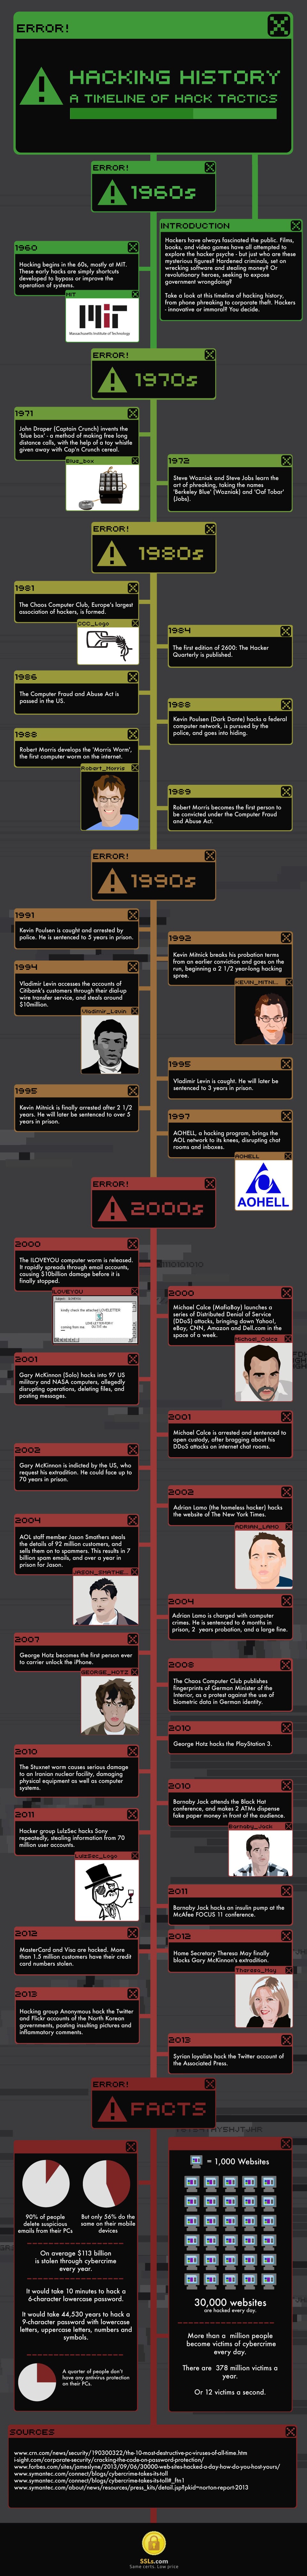 The Hacking History Timeline Infographic